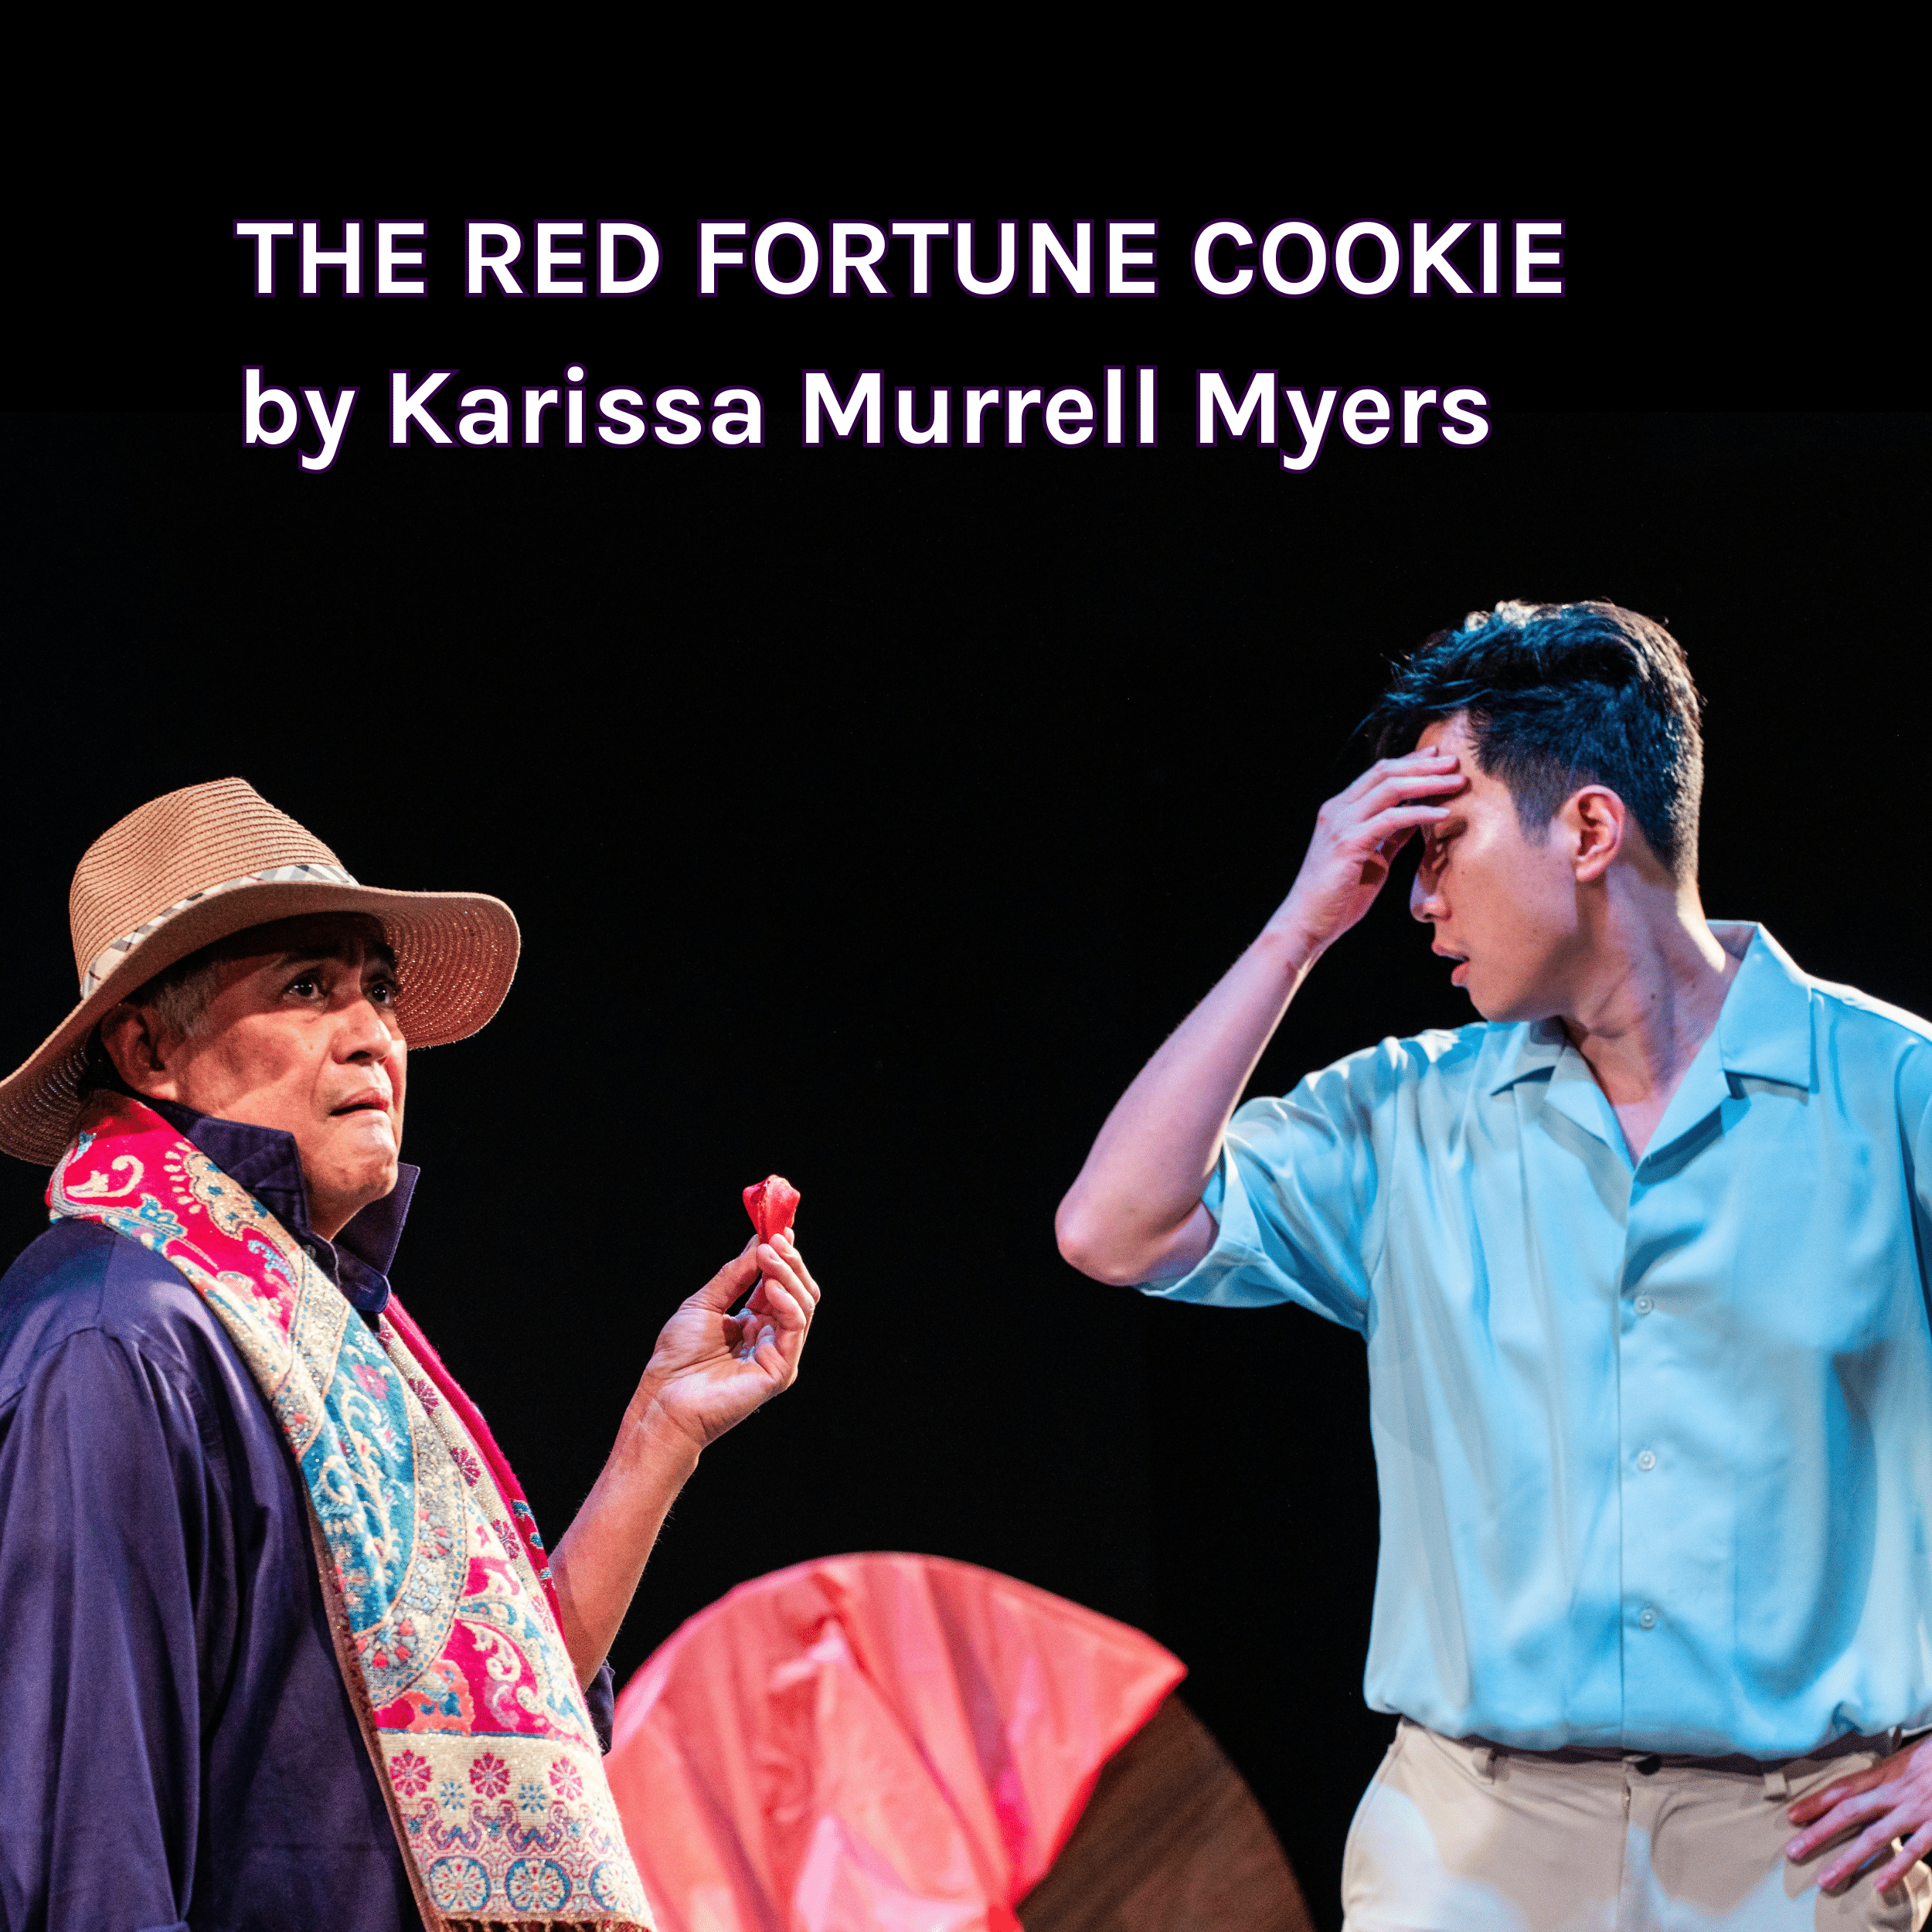 The Red Fortune Cookie by Karissa Murrell Myers